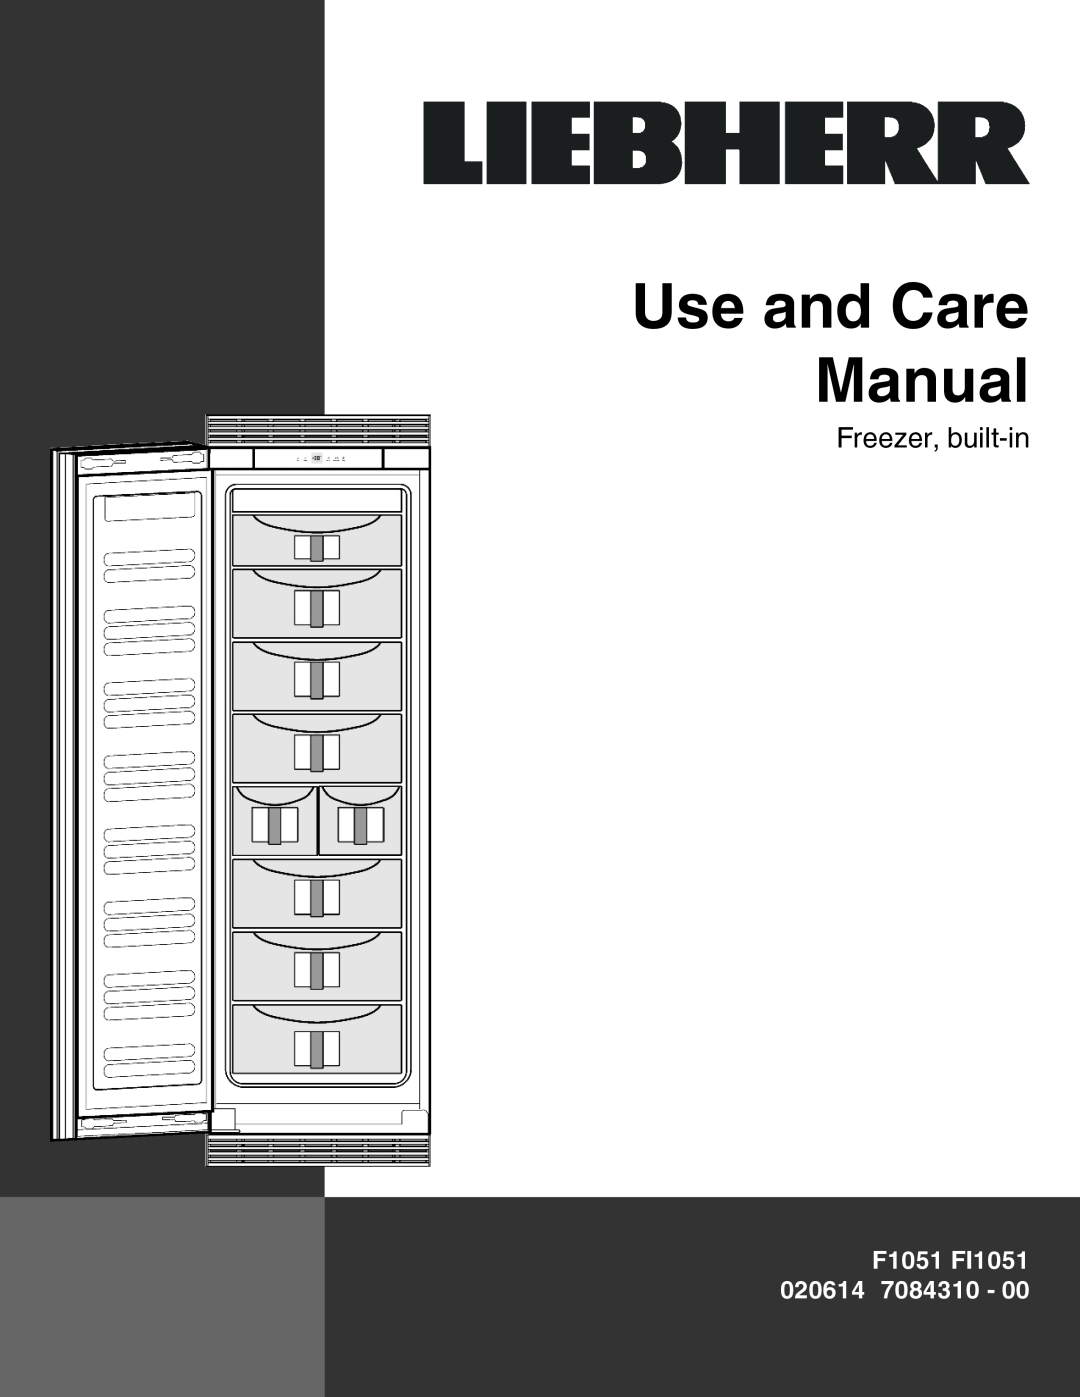 Liebherr manual Use and Care Manual, Freezer, built-in, F1051 FI1051 